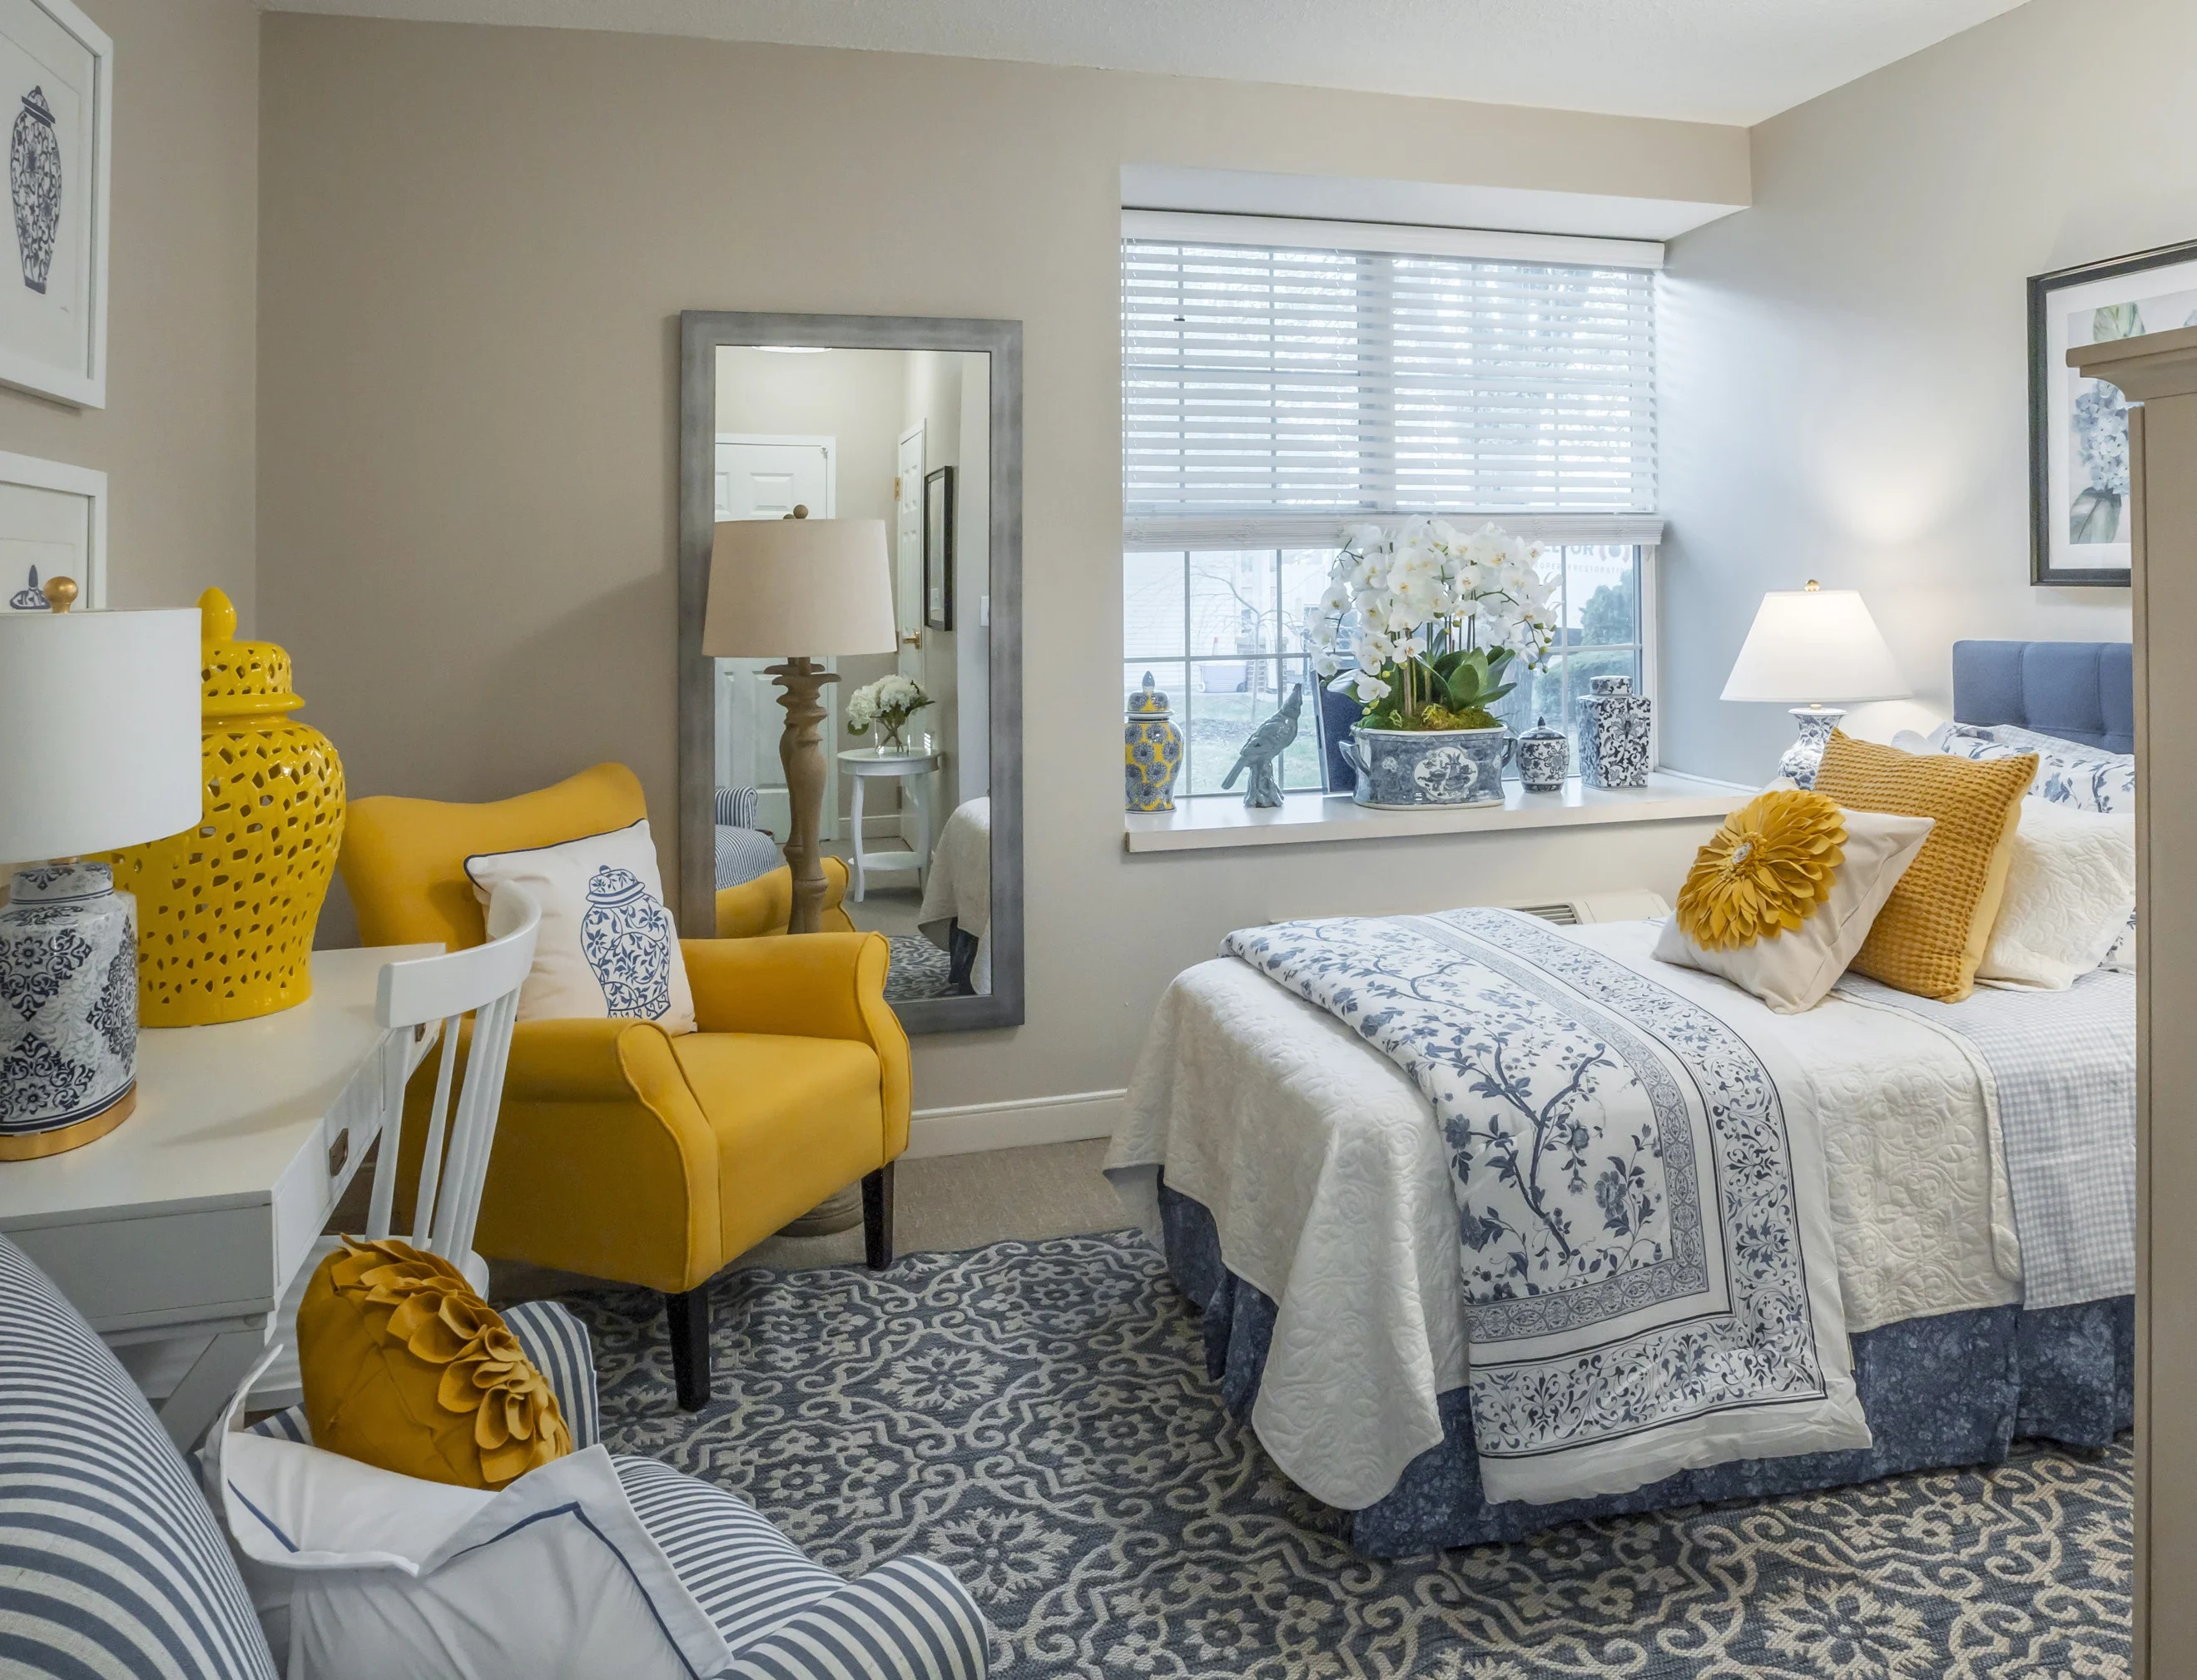 Model bedroom at American House Kingsport, an assisted living home in Kingsport TN